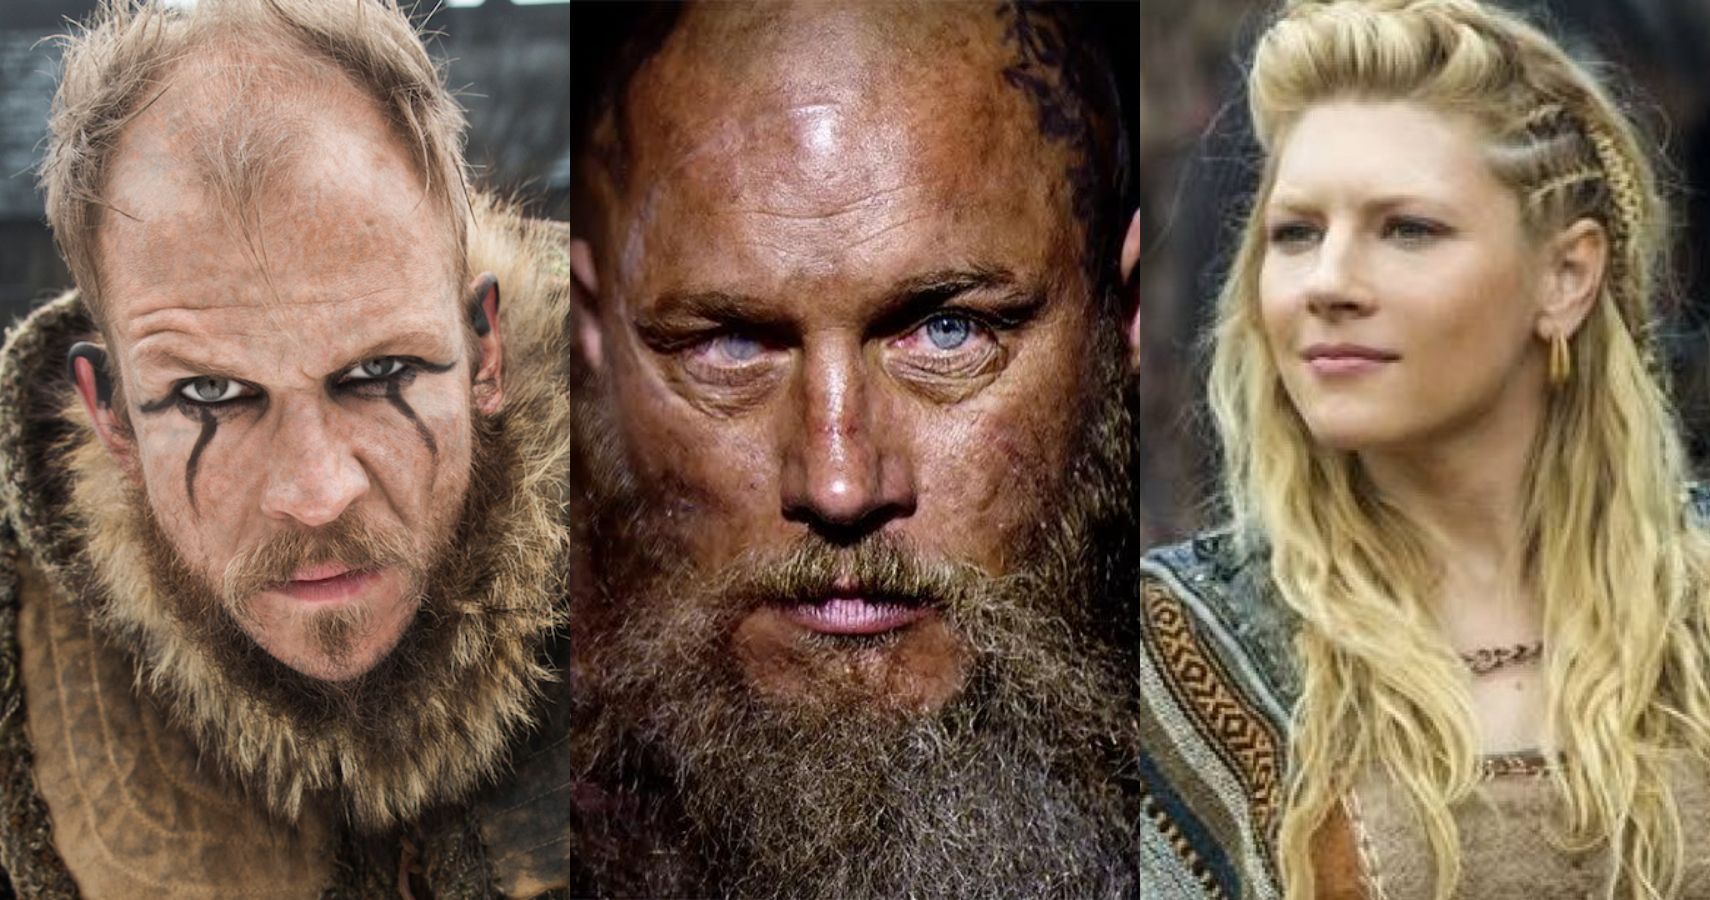 Which characters in the show Vikings were real people? - Quora